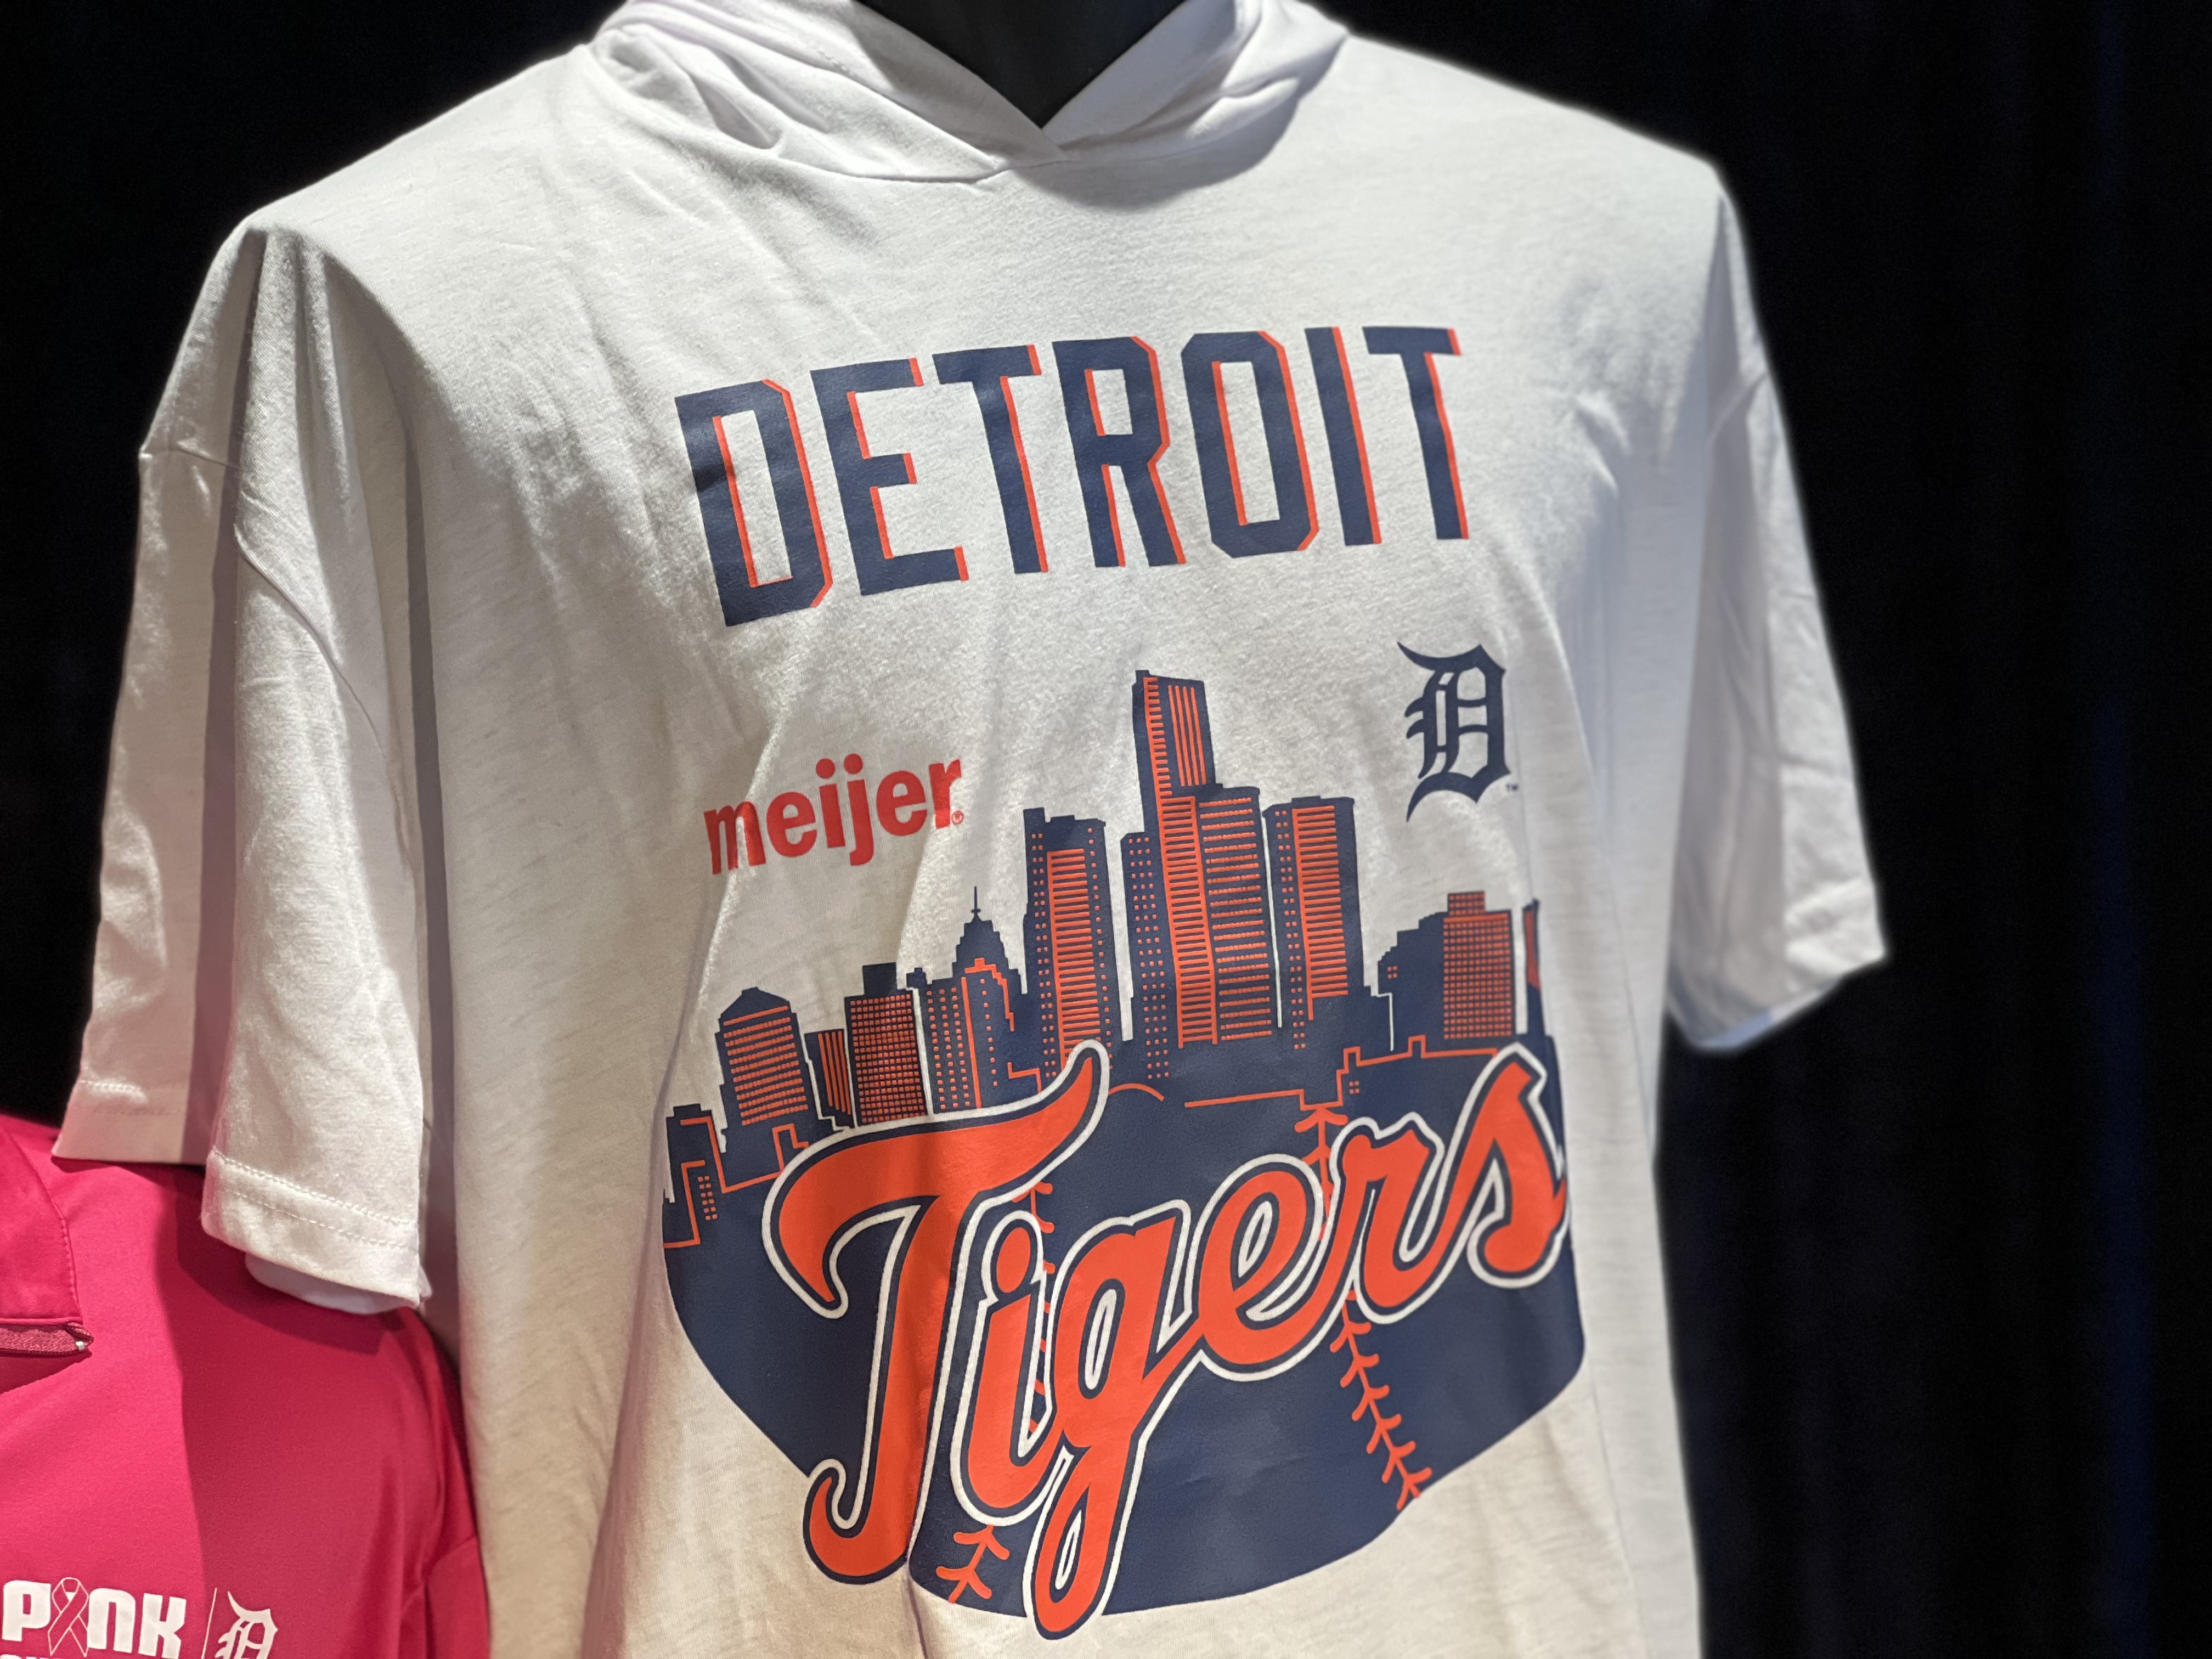 All the Detroit Tigers freebies you can get at Comerica Park this